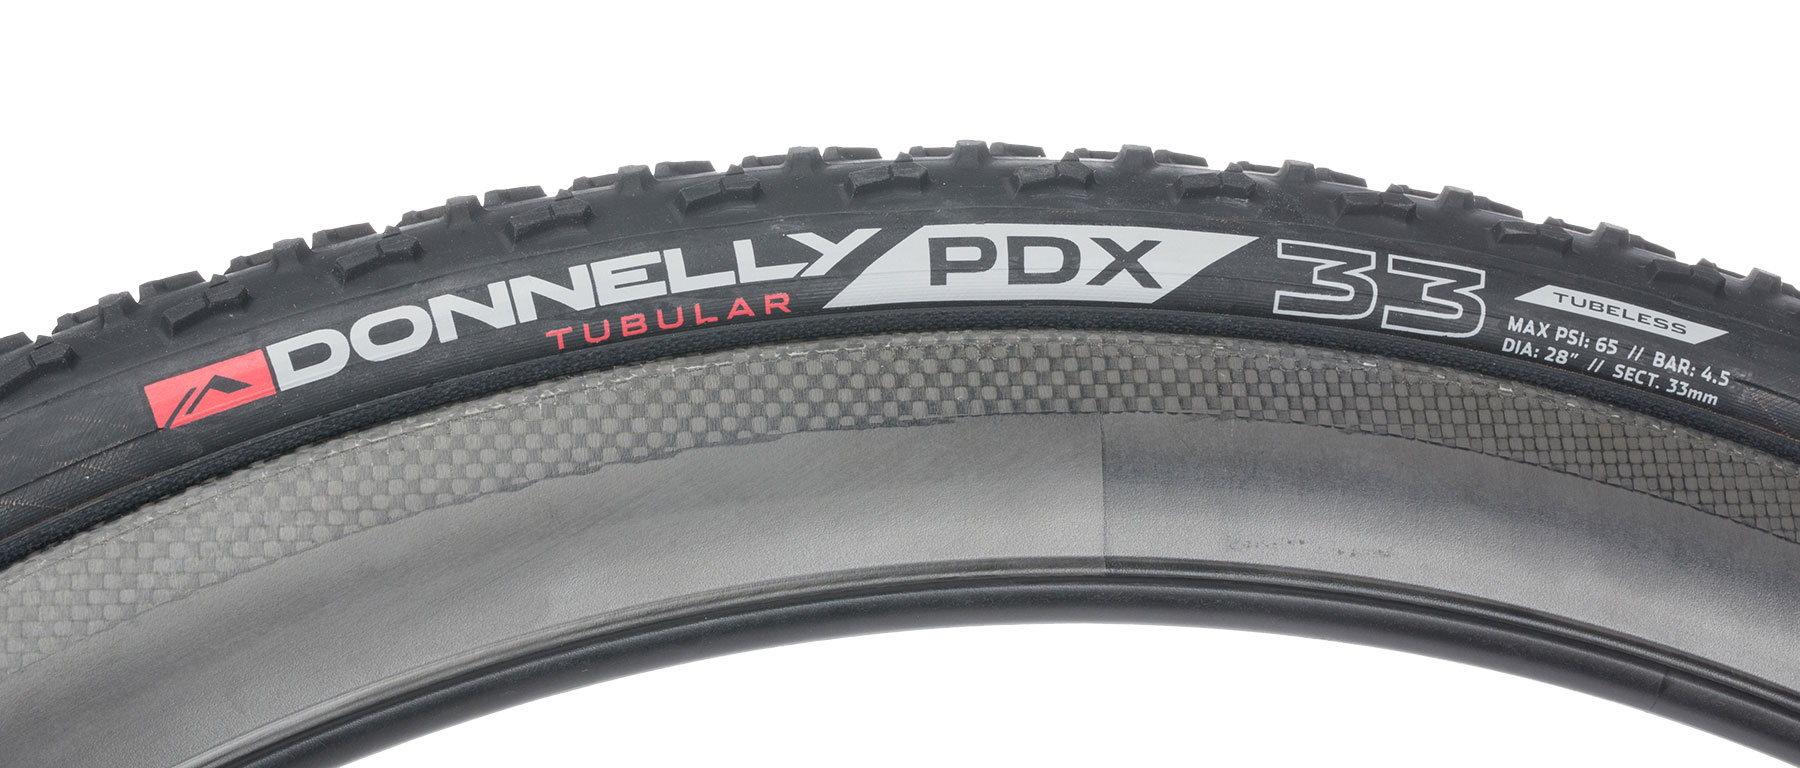 Donnelly PDX Tubular Cyclocross Tire